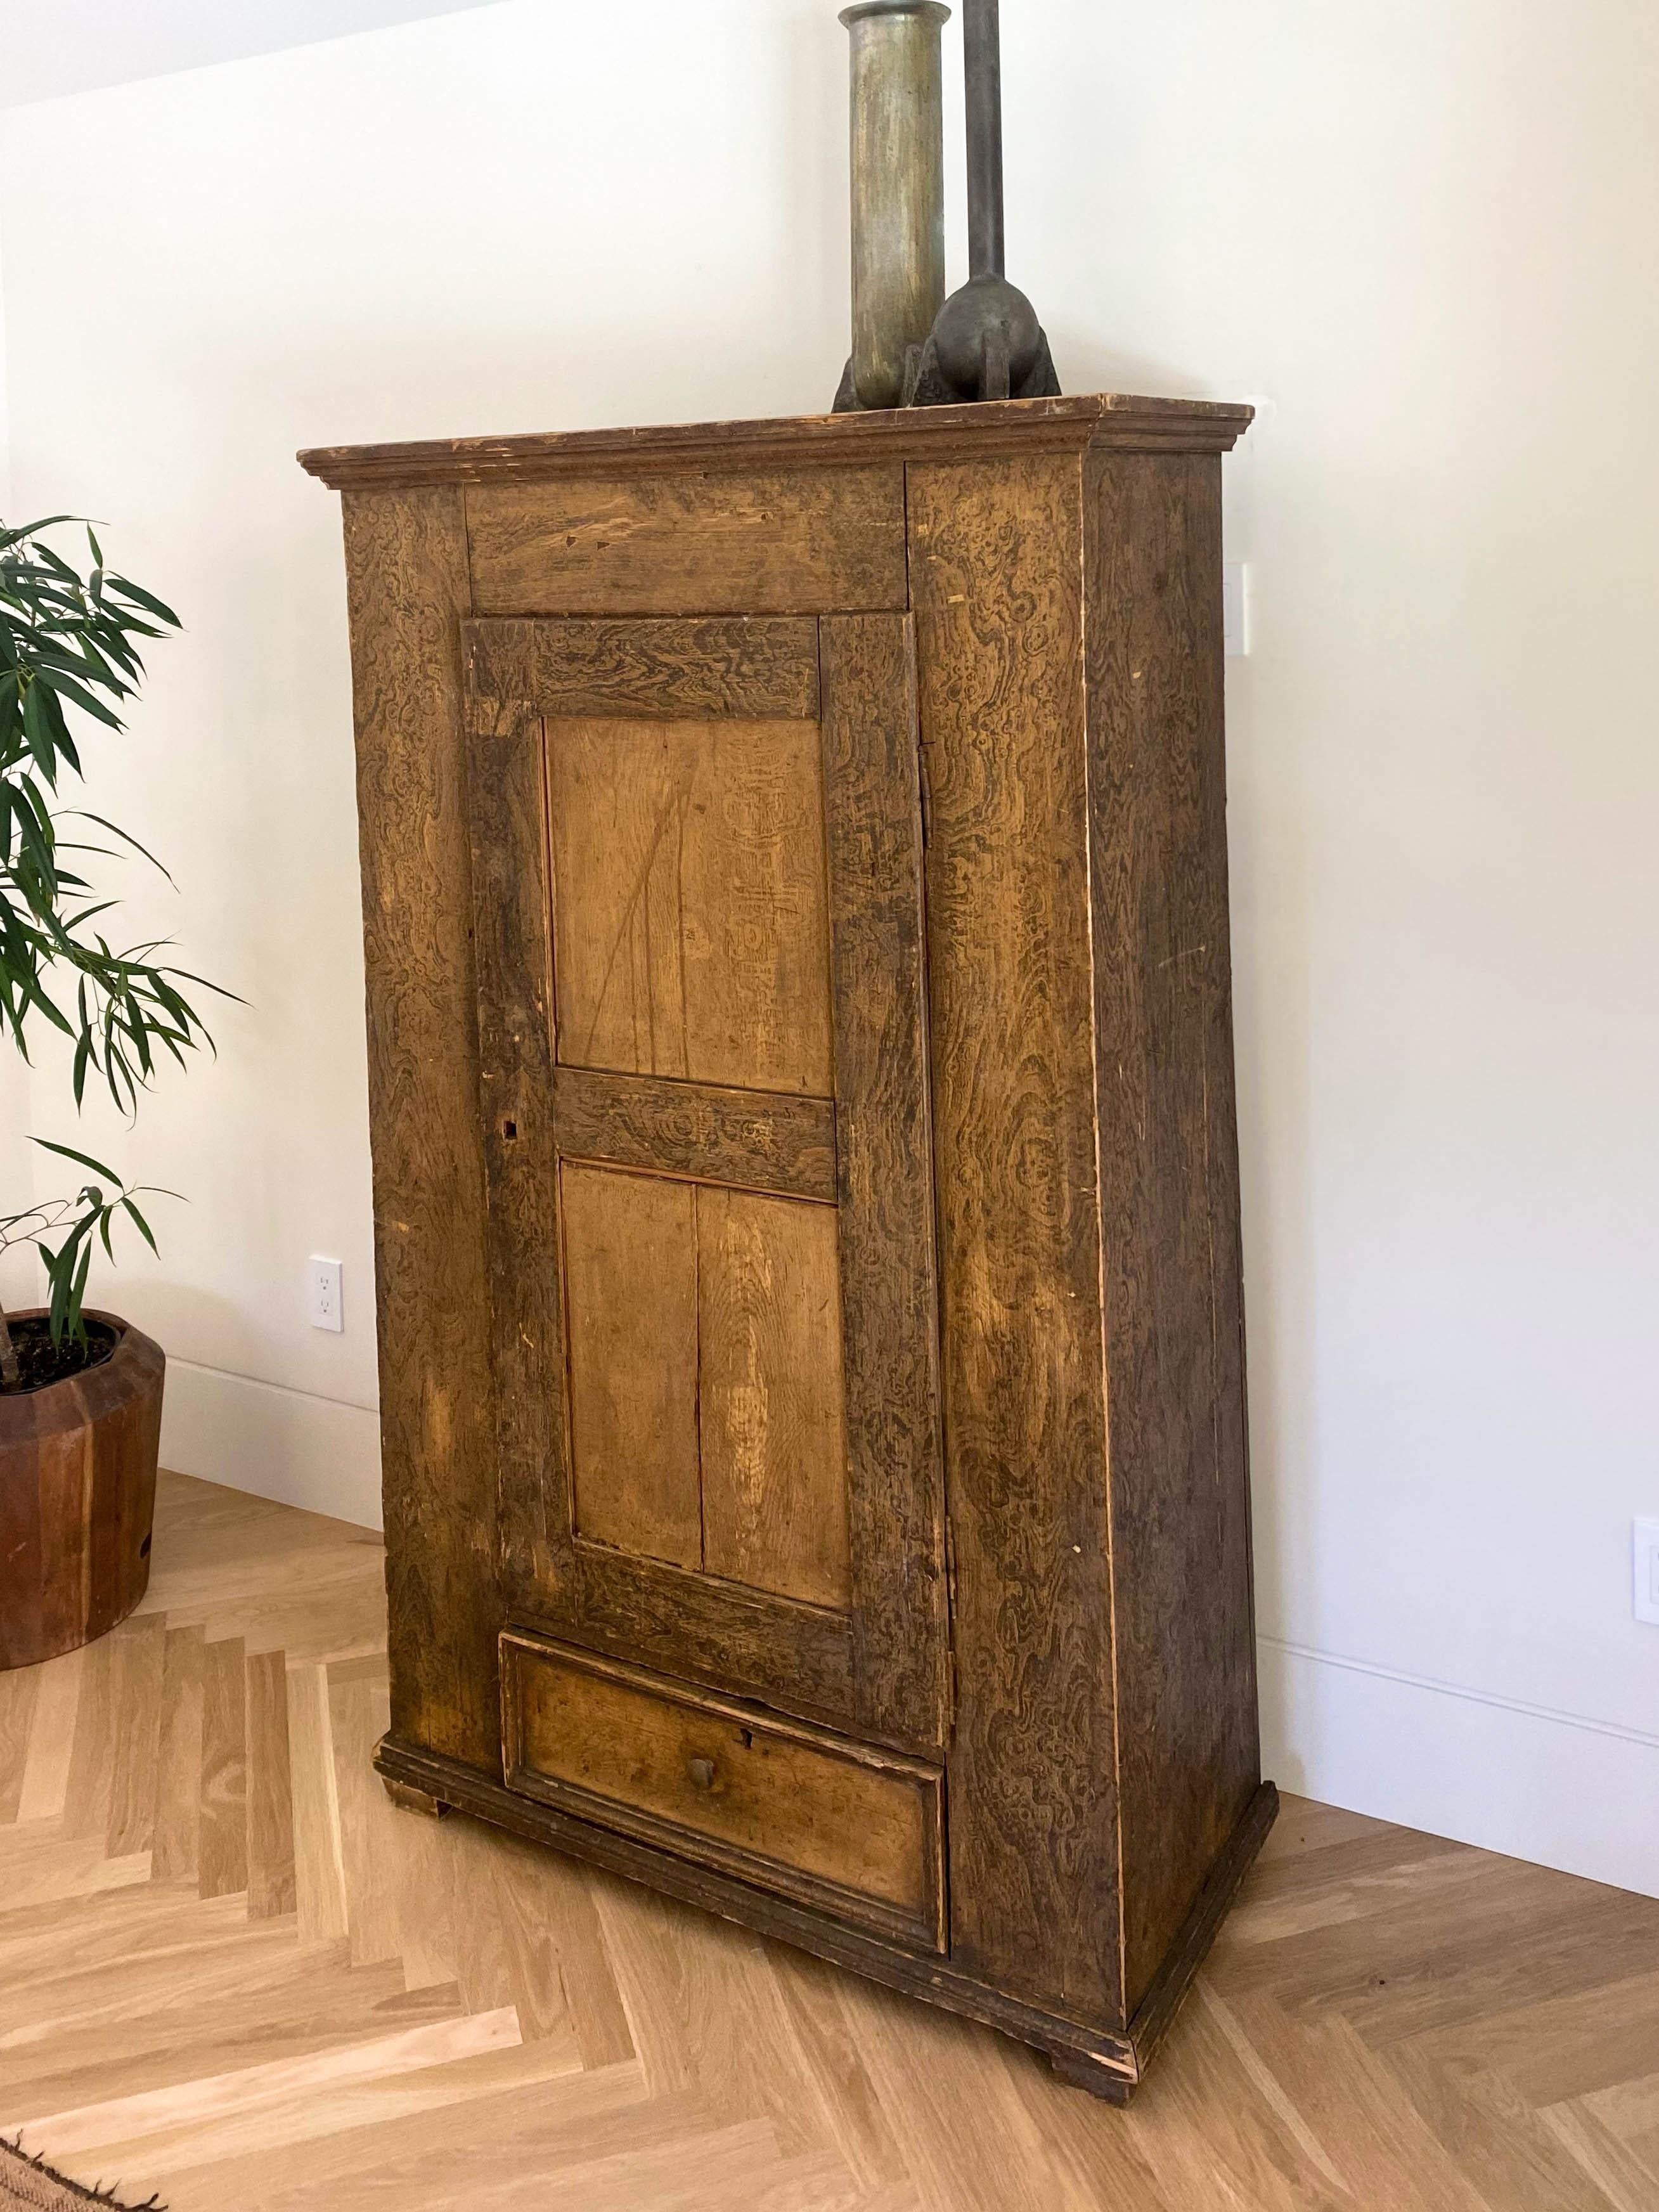 Rustic 19th century armoire cabinet in aged oak with new shelves.